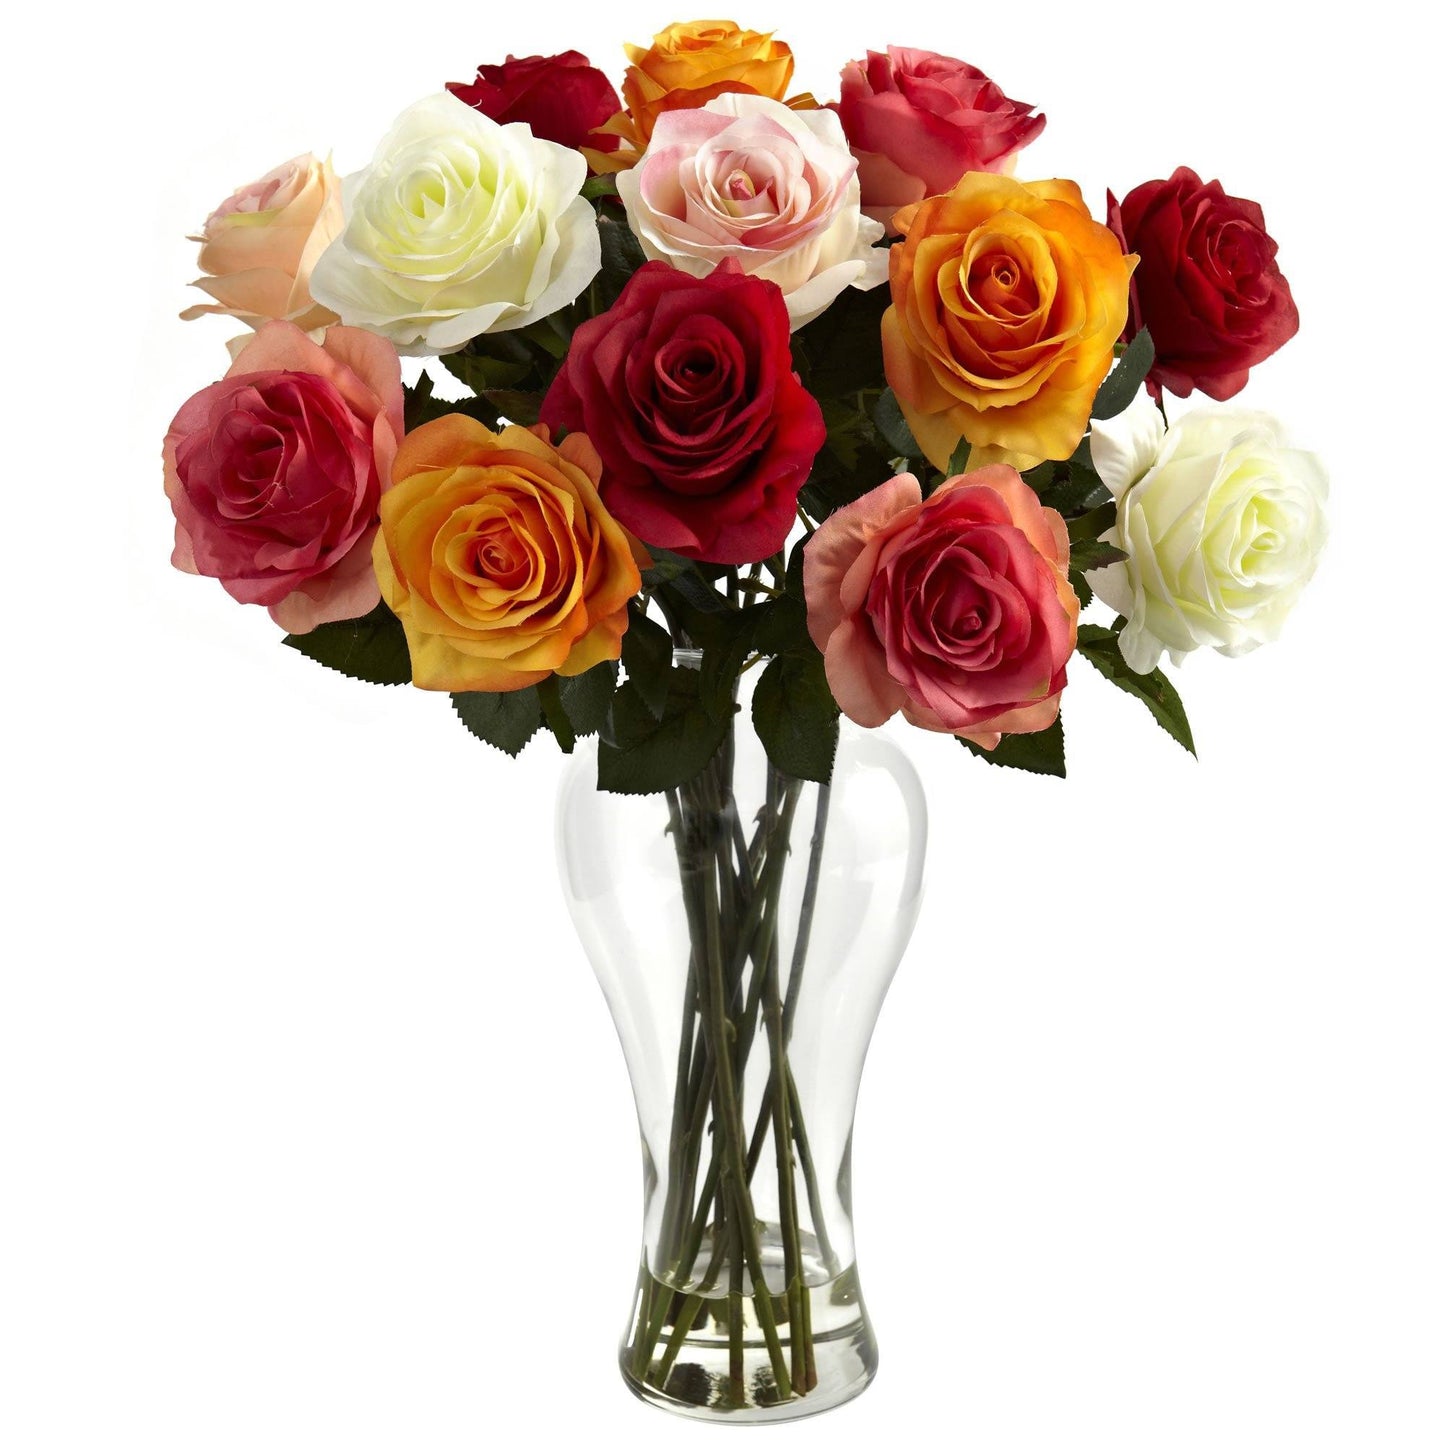 Assorted Blooming Roses w/Vase by Nearly Natural